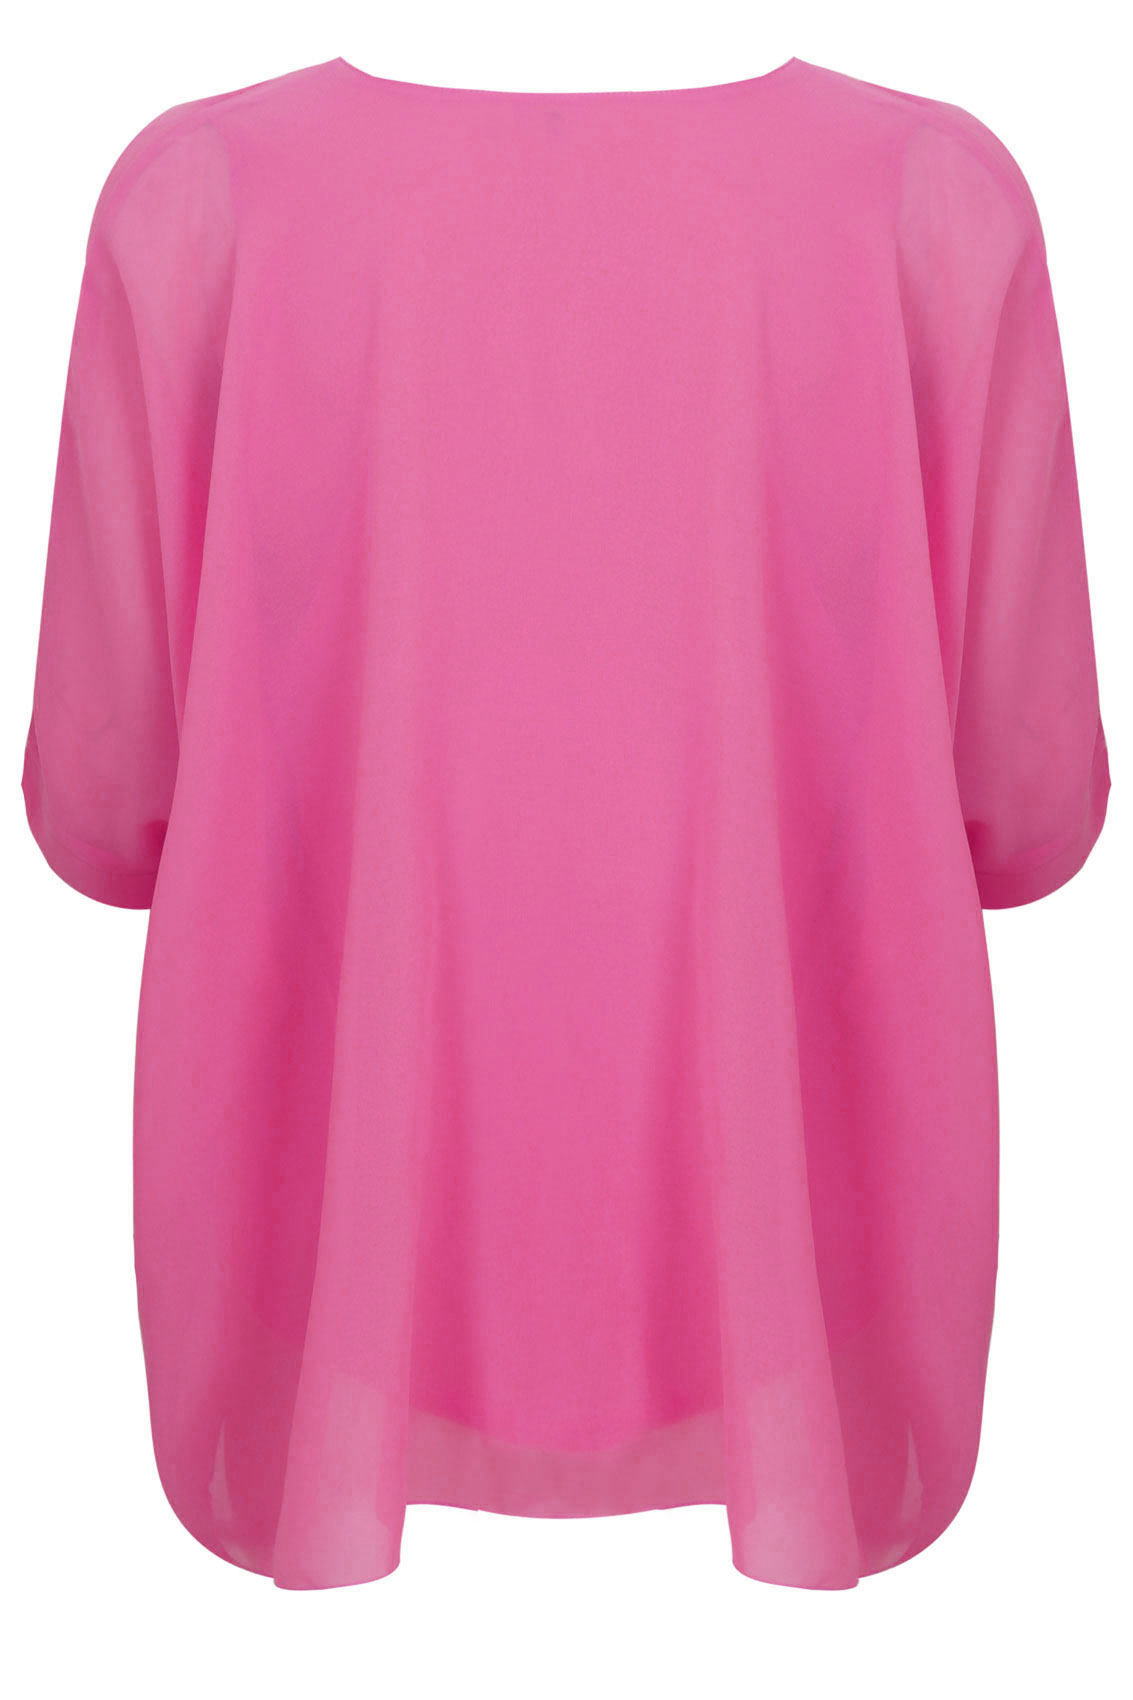 Pink Batwing Sleeve Chiffon Top With Necklace Plus size